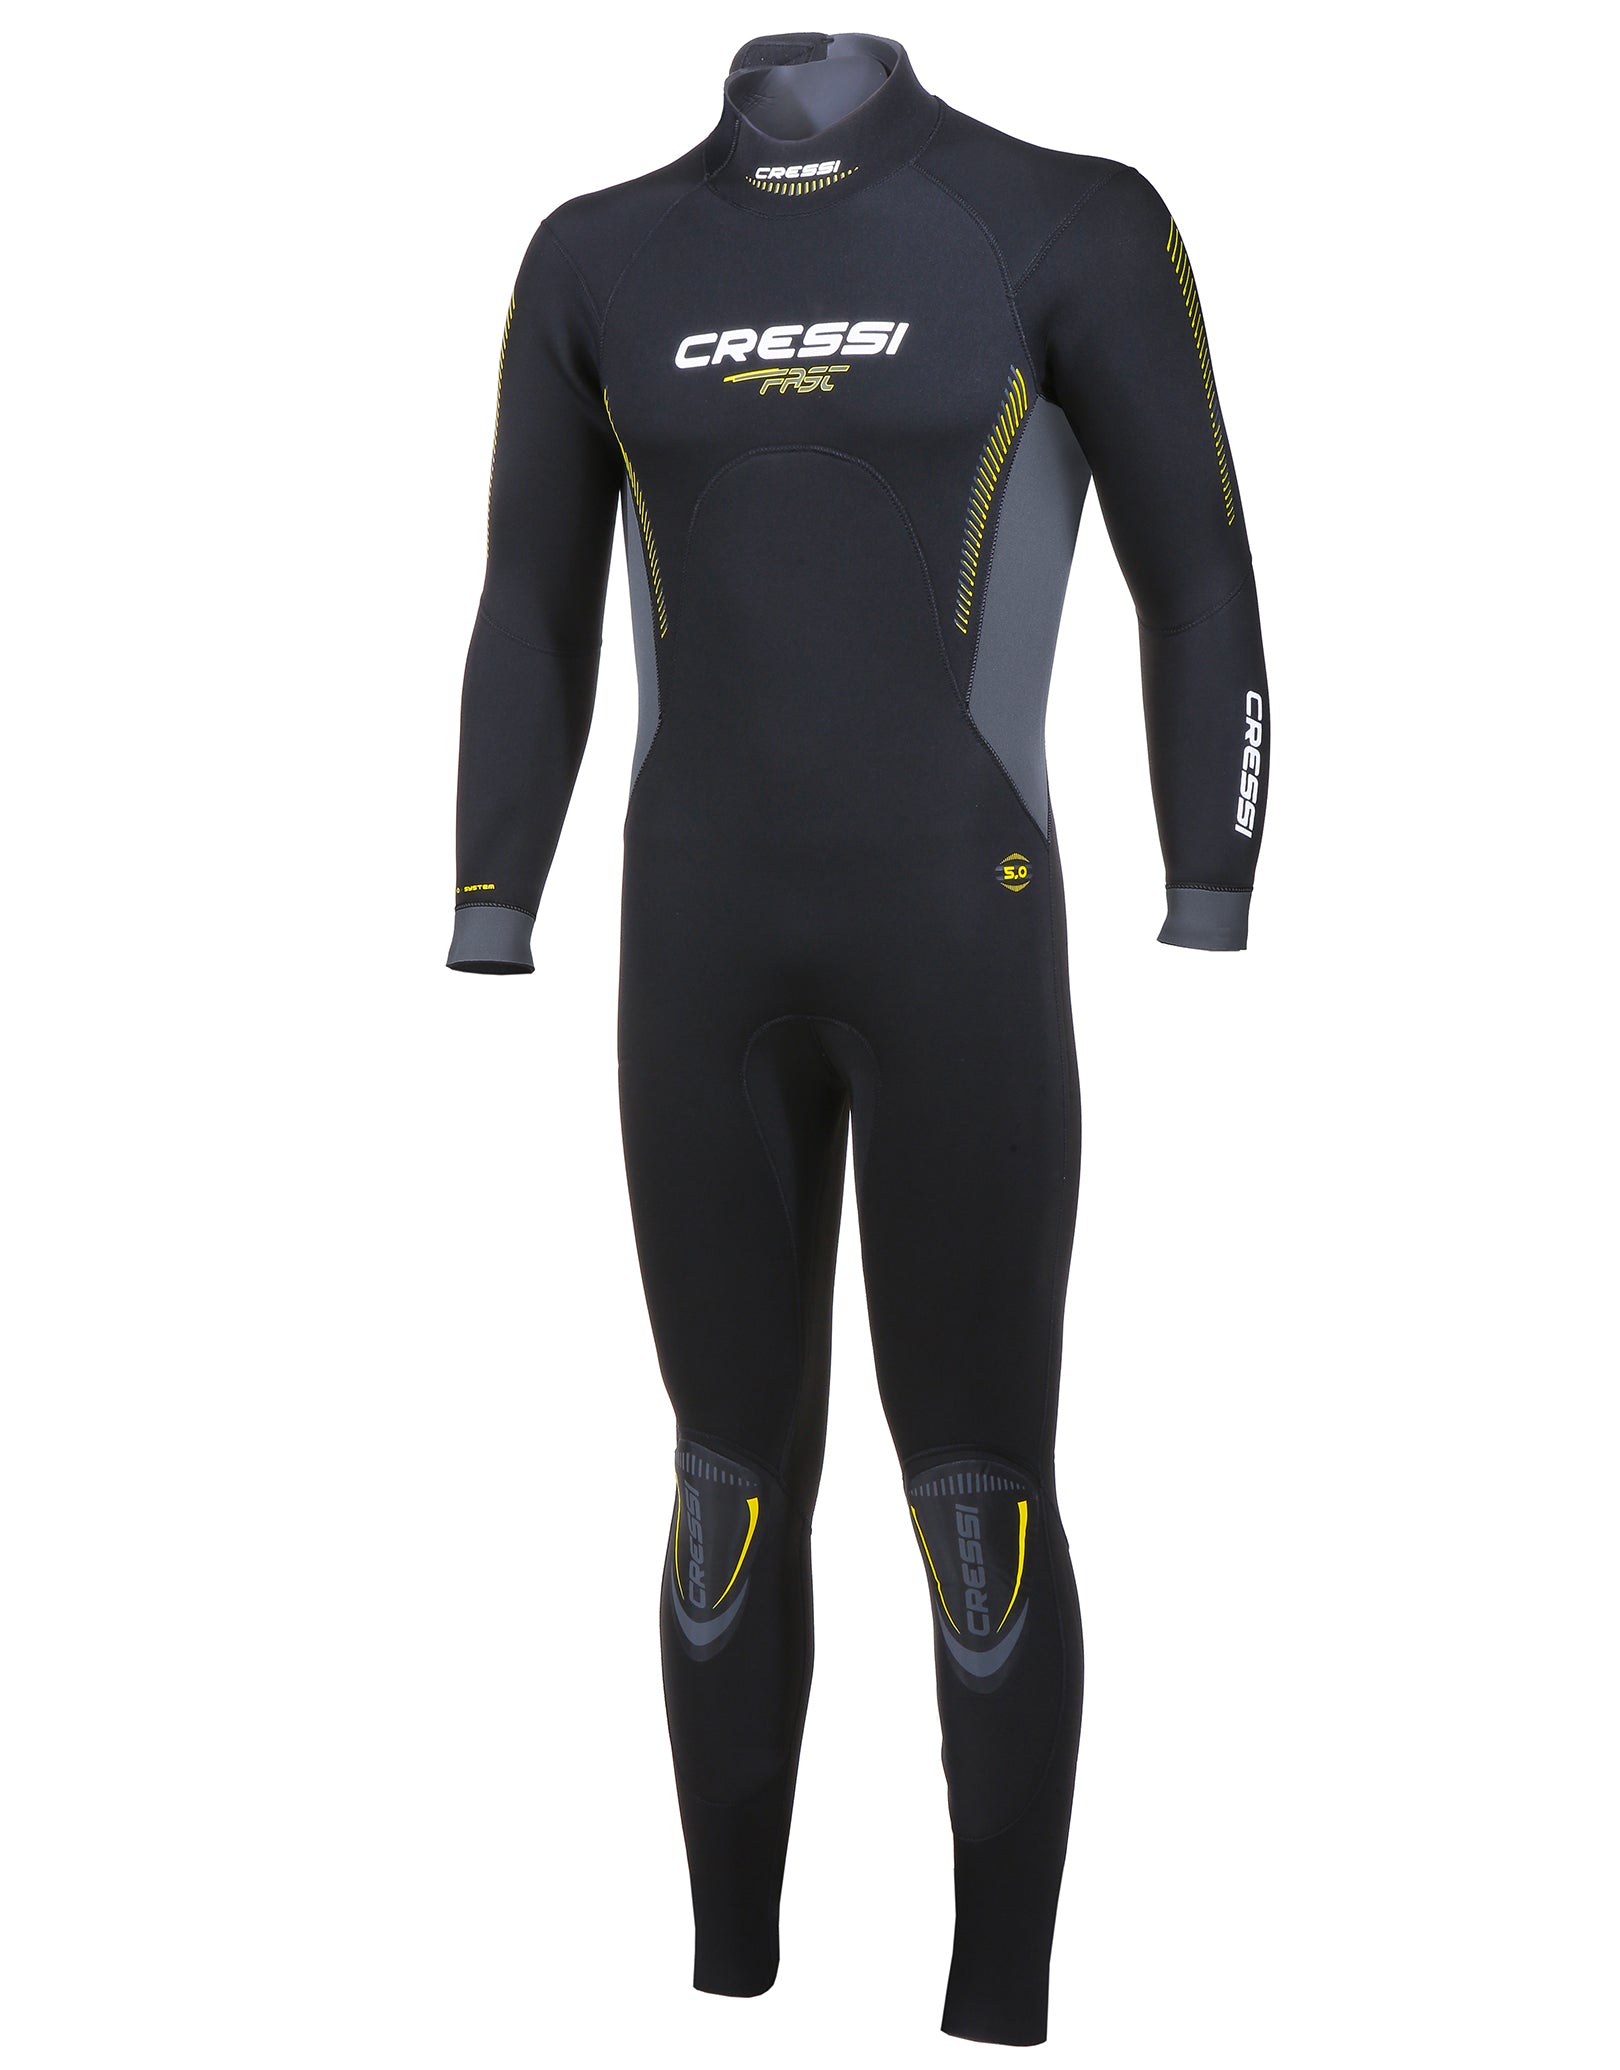 Cressi Shorty Wetsuit Size Chart